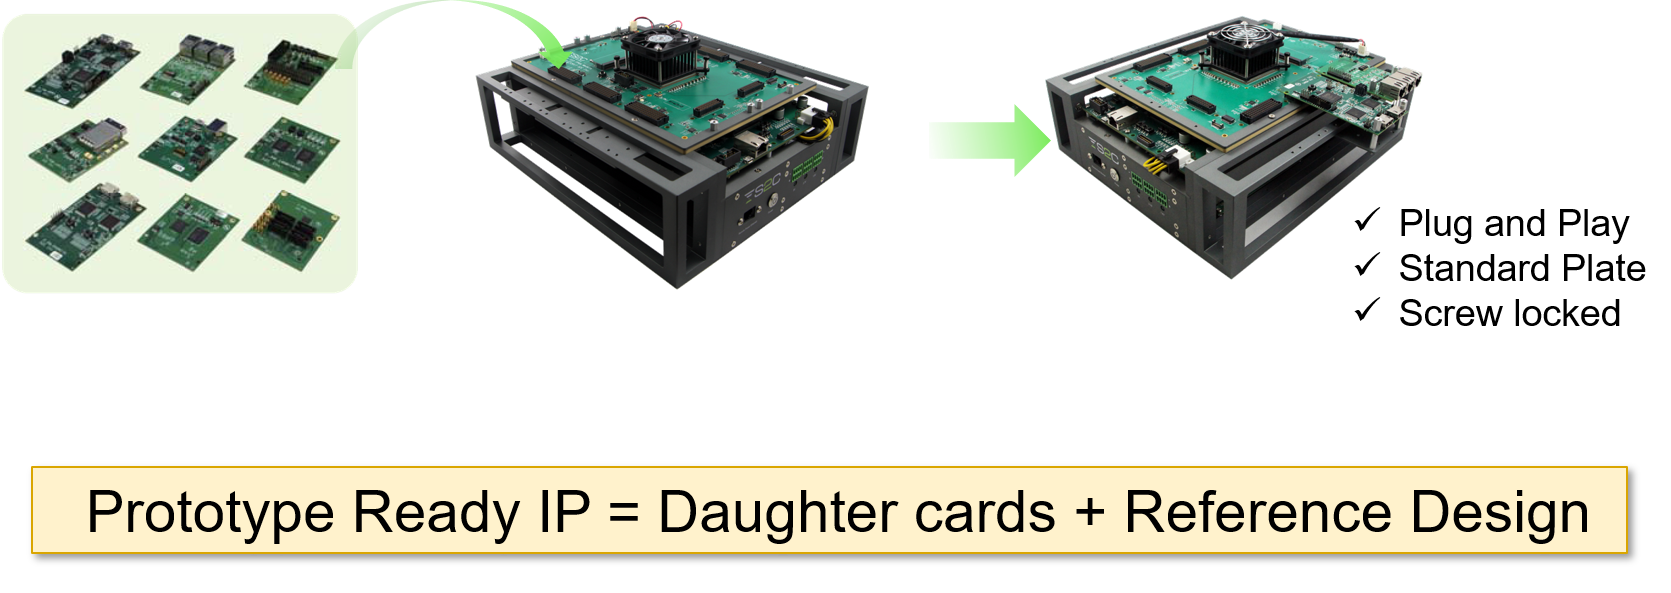 the-importance-of-daughter-cards-in-fpga-prototyping-semiwiki.png